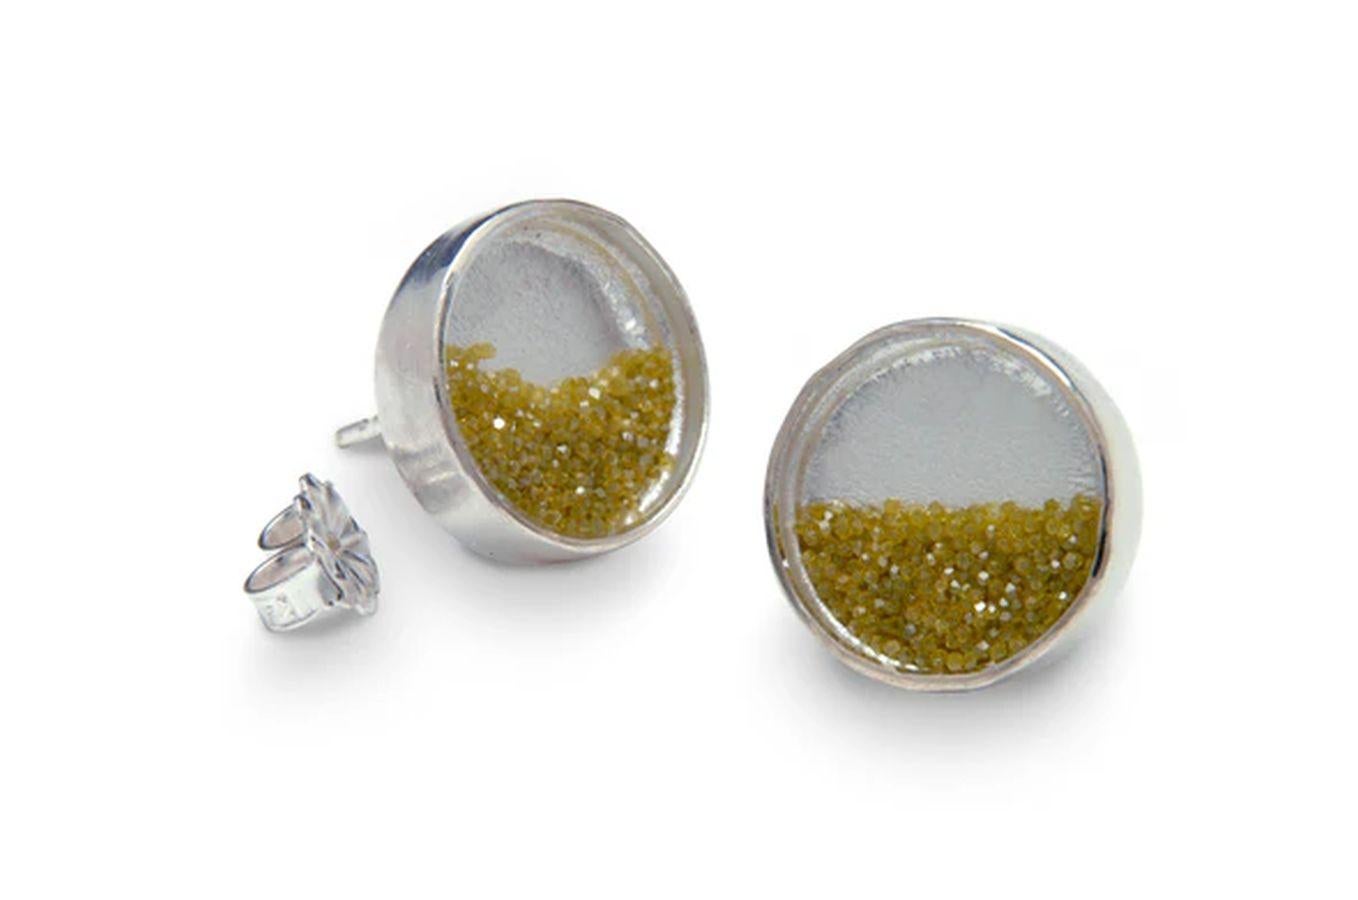 Simply Beautiful! Sparkling Golden Diamond Dust Sterling Silver Post Earrings. Each pair contains One Carat of Golden Diamonds that move freely inside an encased Custom-Made Mineral Crystal in Hand crafted Sterling Silver surround. Lightweight Super